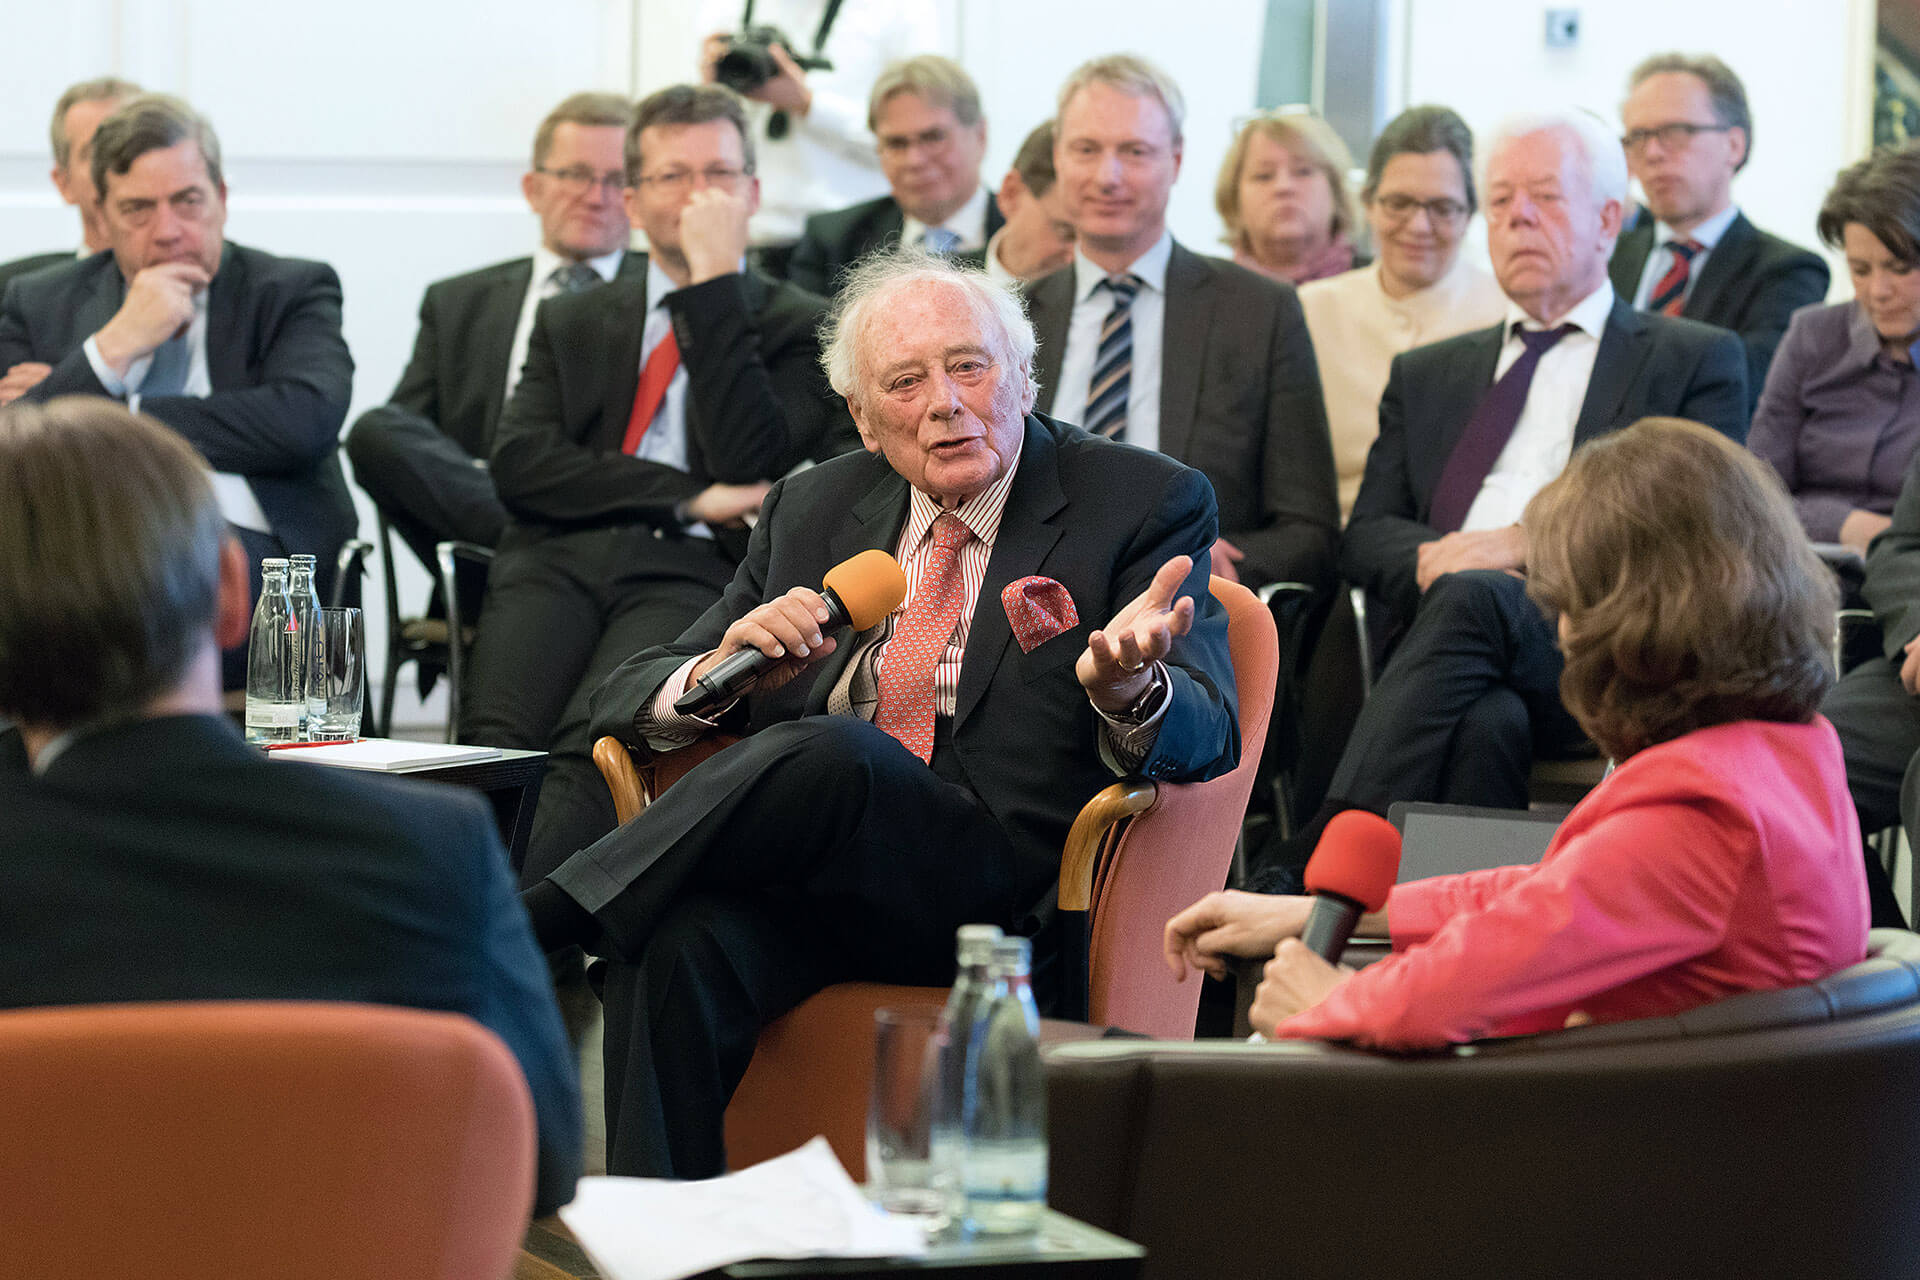 Prof. Dr. h. c. mult. Reinhold Würth is committed to regular dialog between the corporate sector and policymakers, such as at the events held here at Würth Haus Berlin.